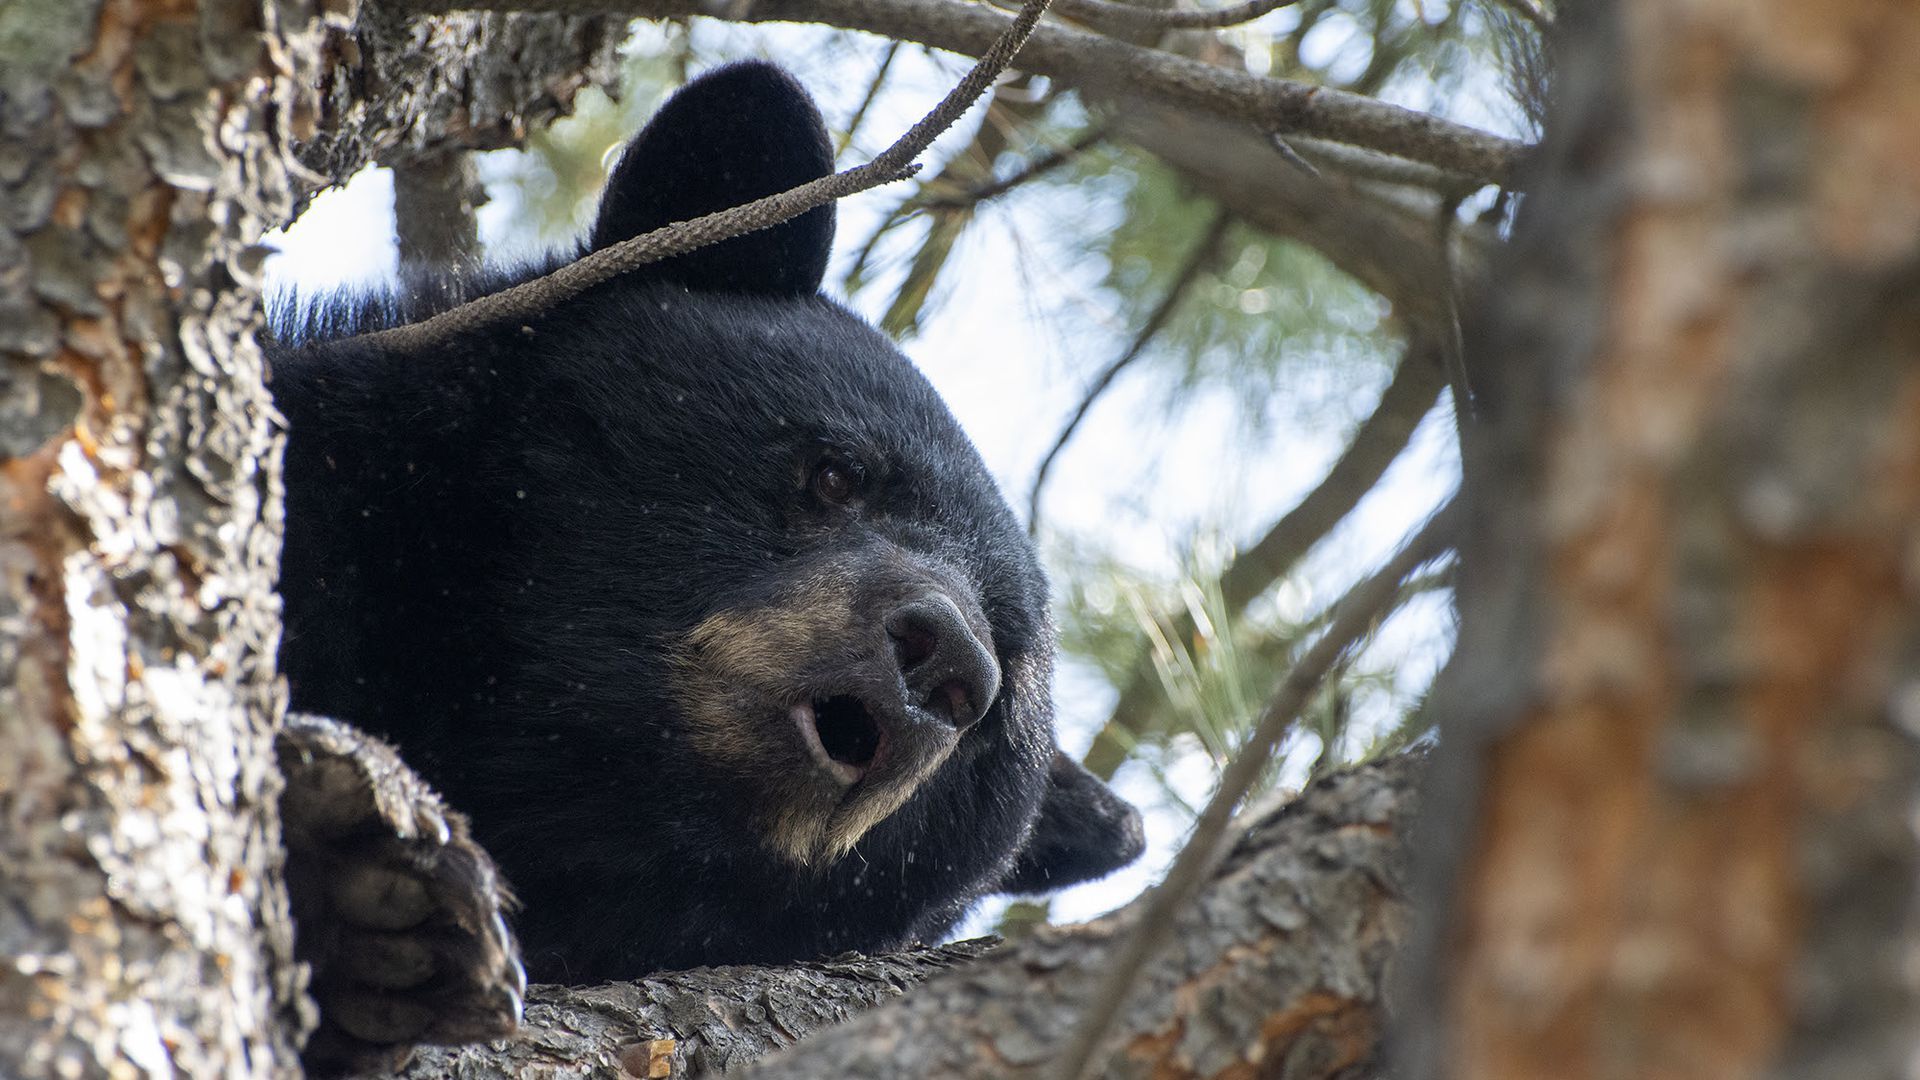 A black bear in a tree near C-470 and South Platte Canyon Road. 